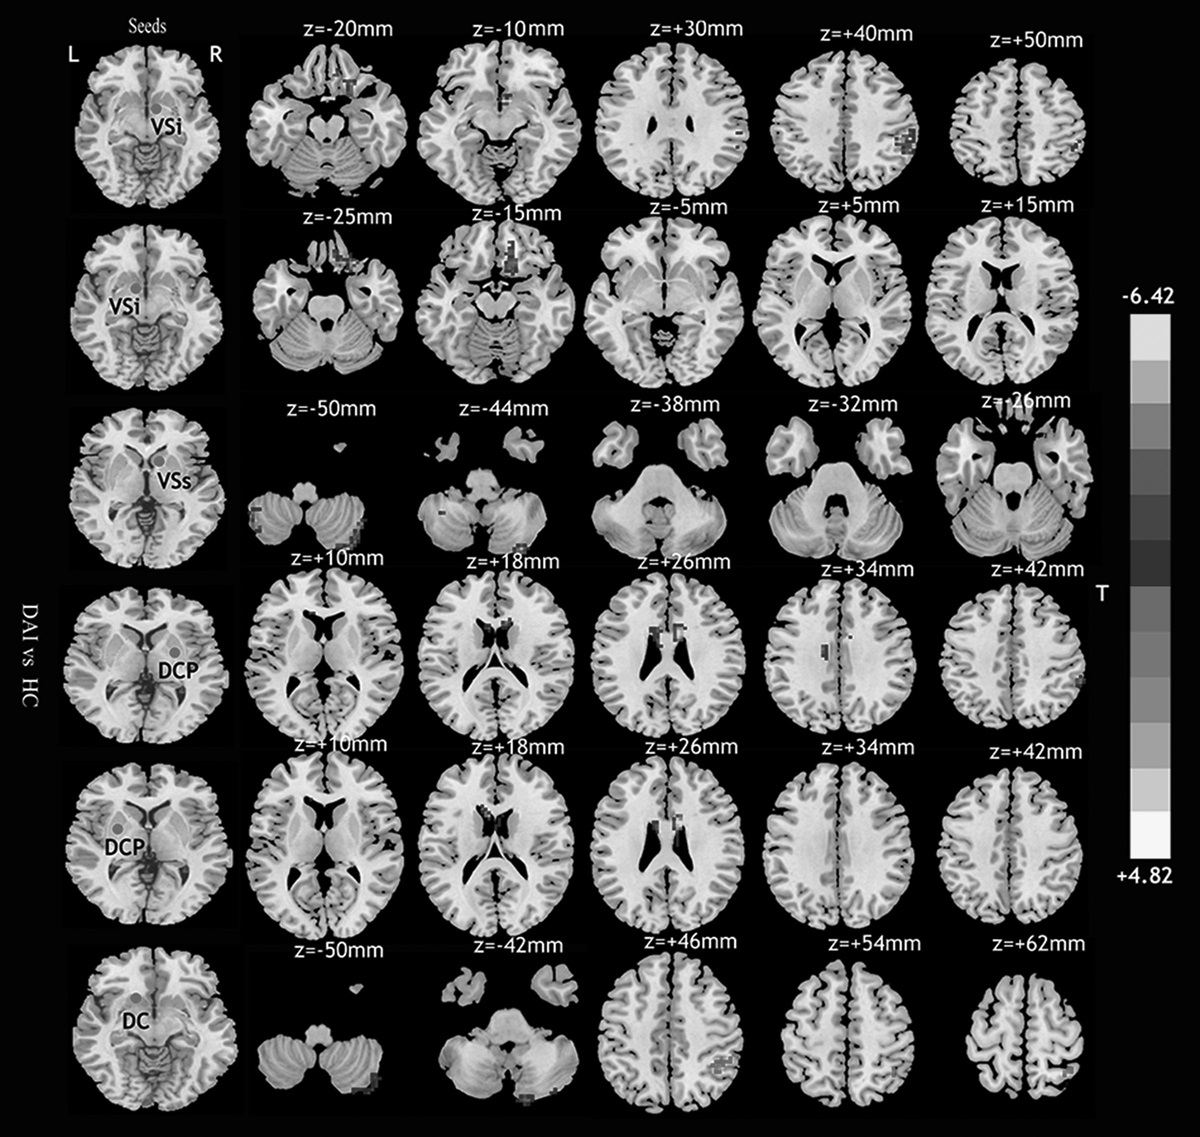 Disrupted functional connectivity of the striatum in patients with diffuse axonal injury: a resting-state functional MRI study